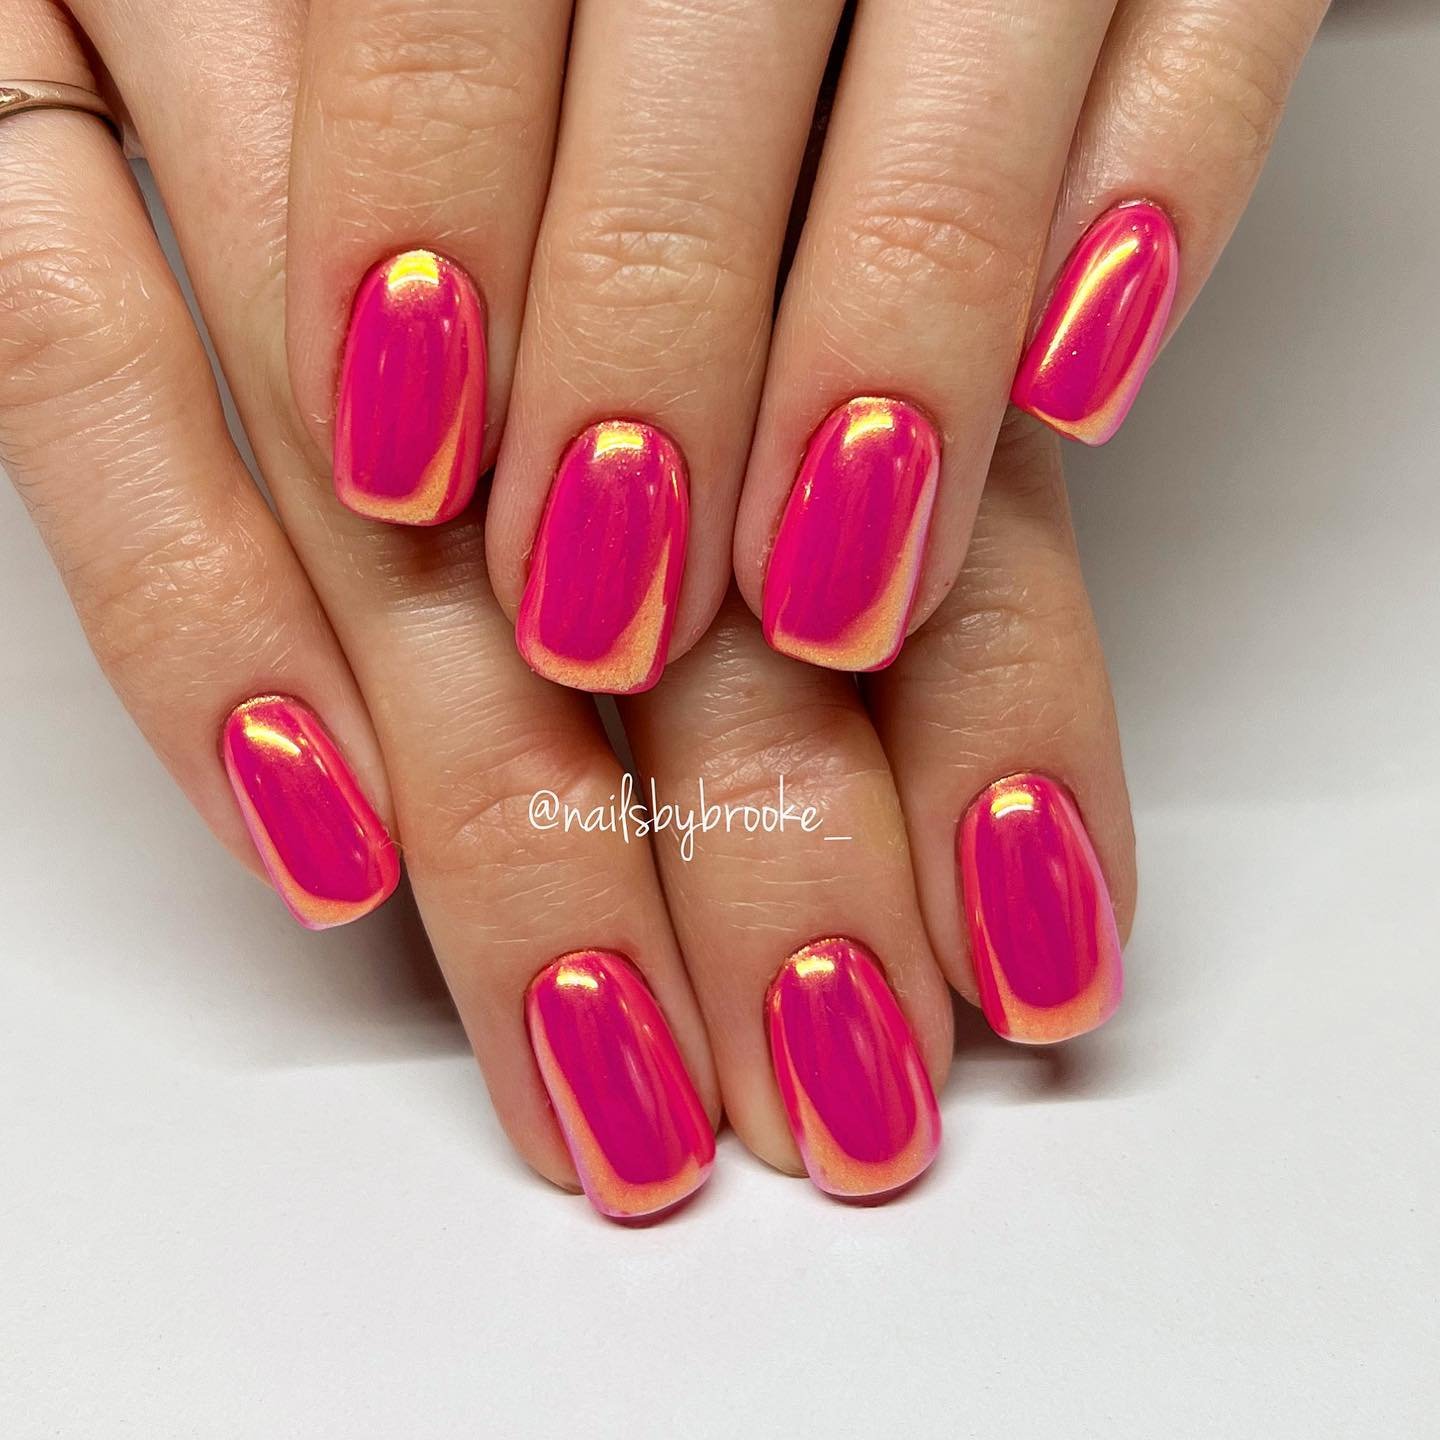 3 - Picture of Pink Chrome Nails